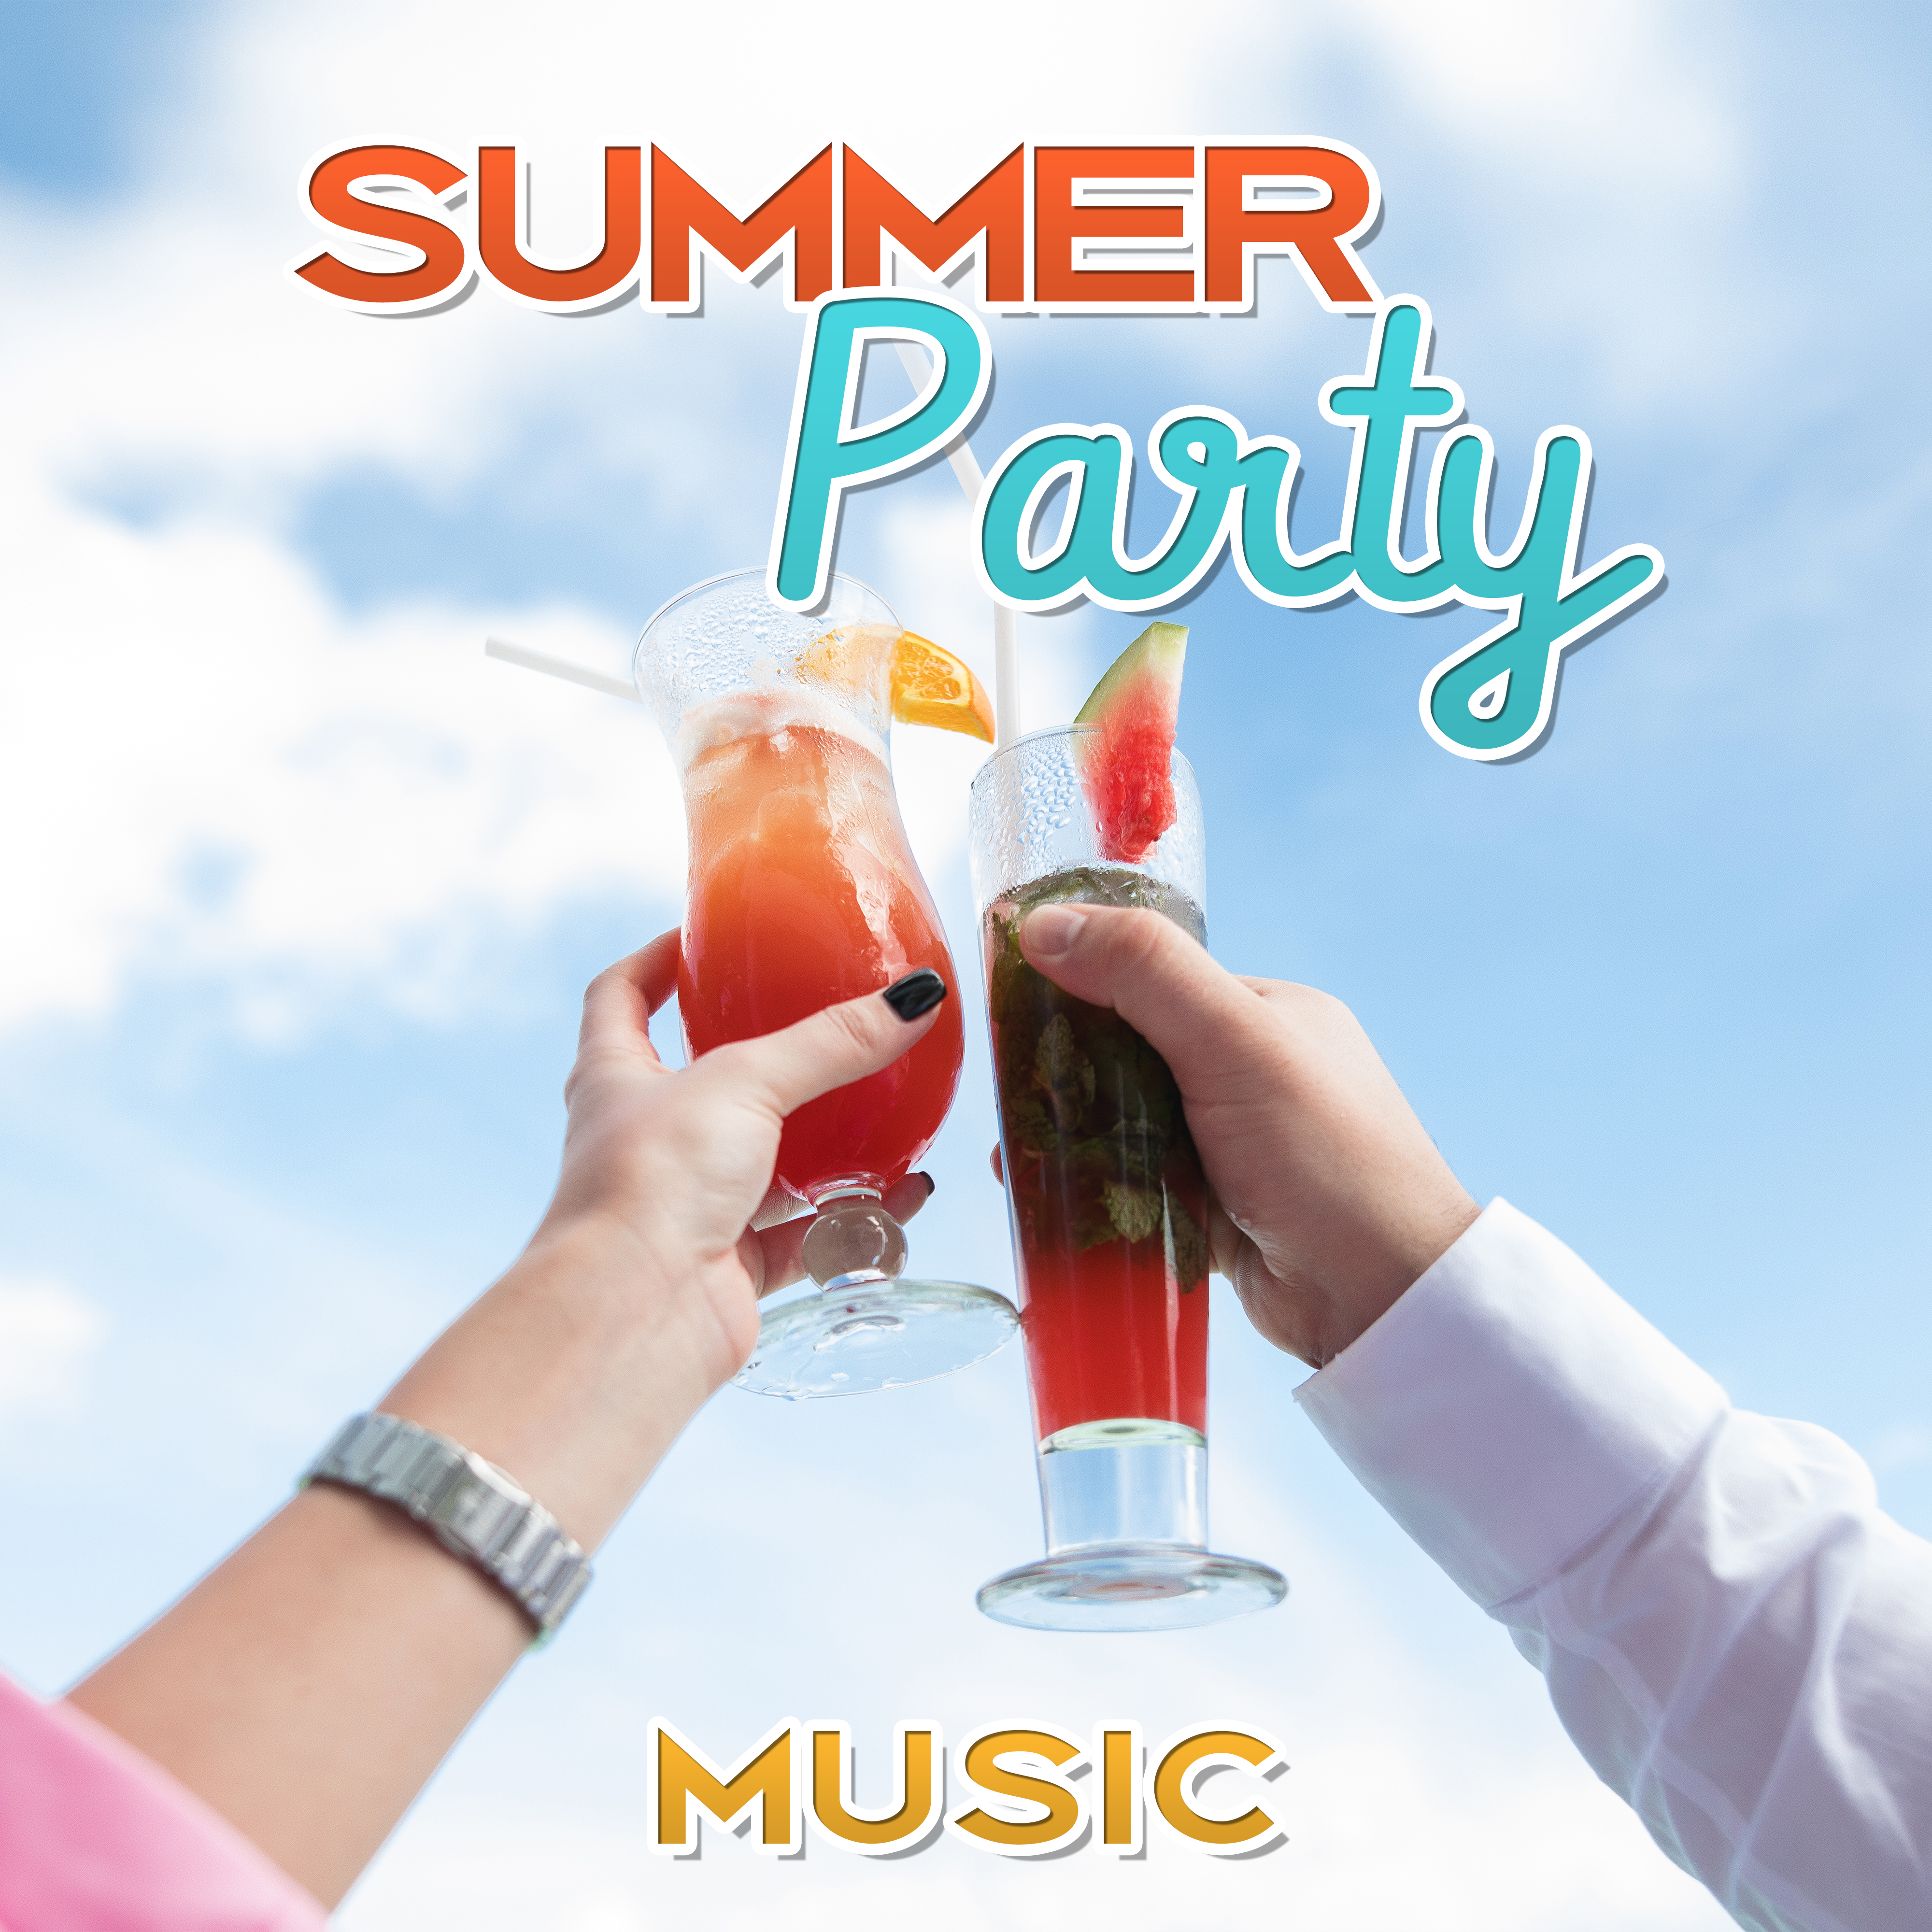 Summer Party Music – Chill Out Summer, Holiday 2017, Party Time, Cold Drinks, Music to Have Some Fun